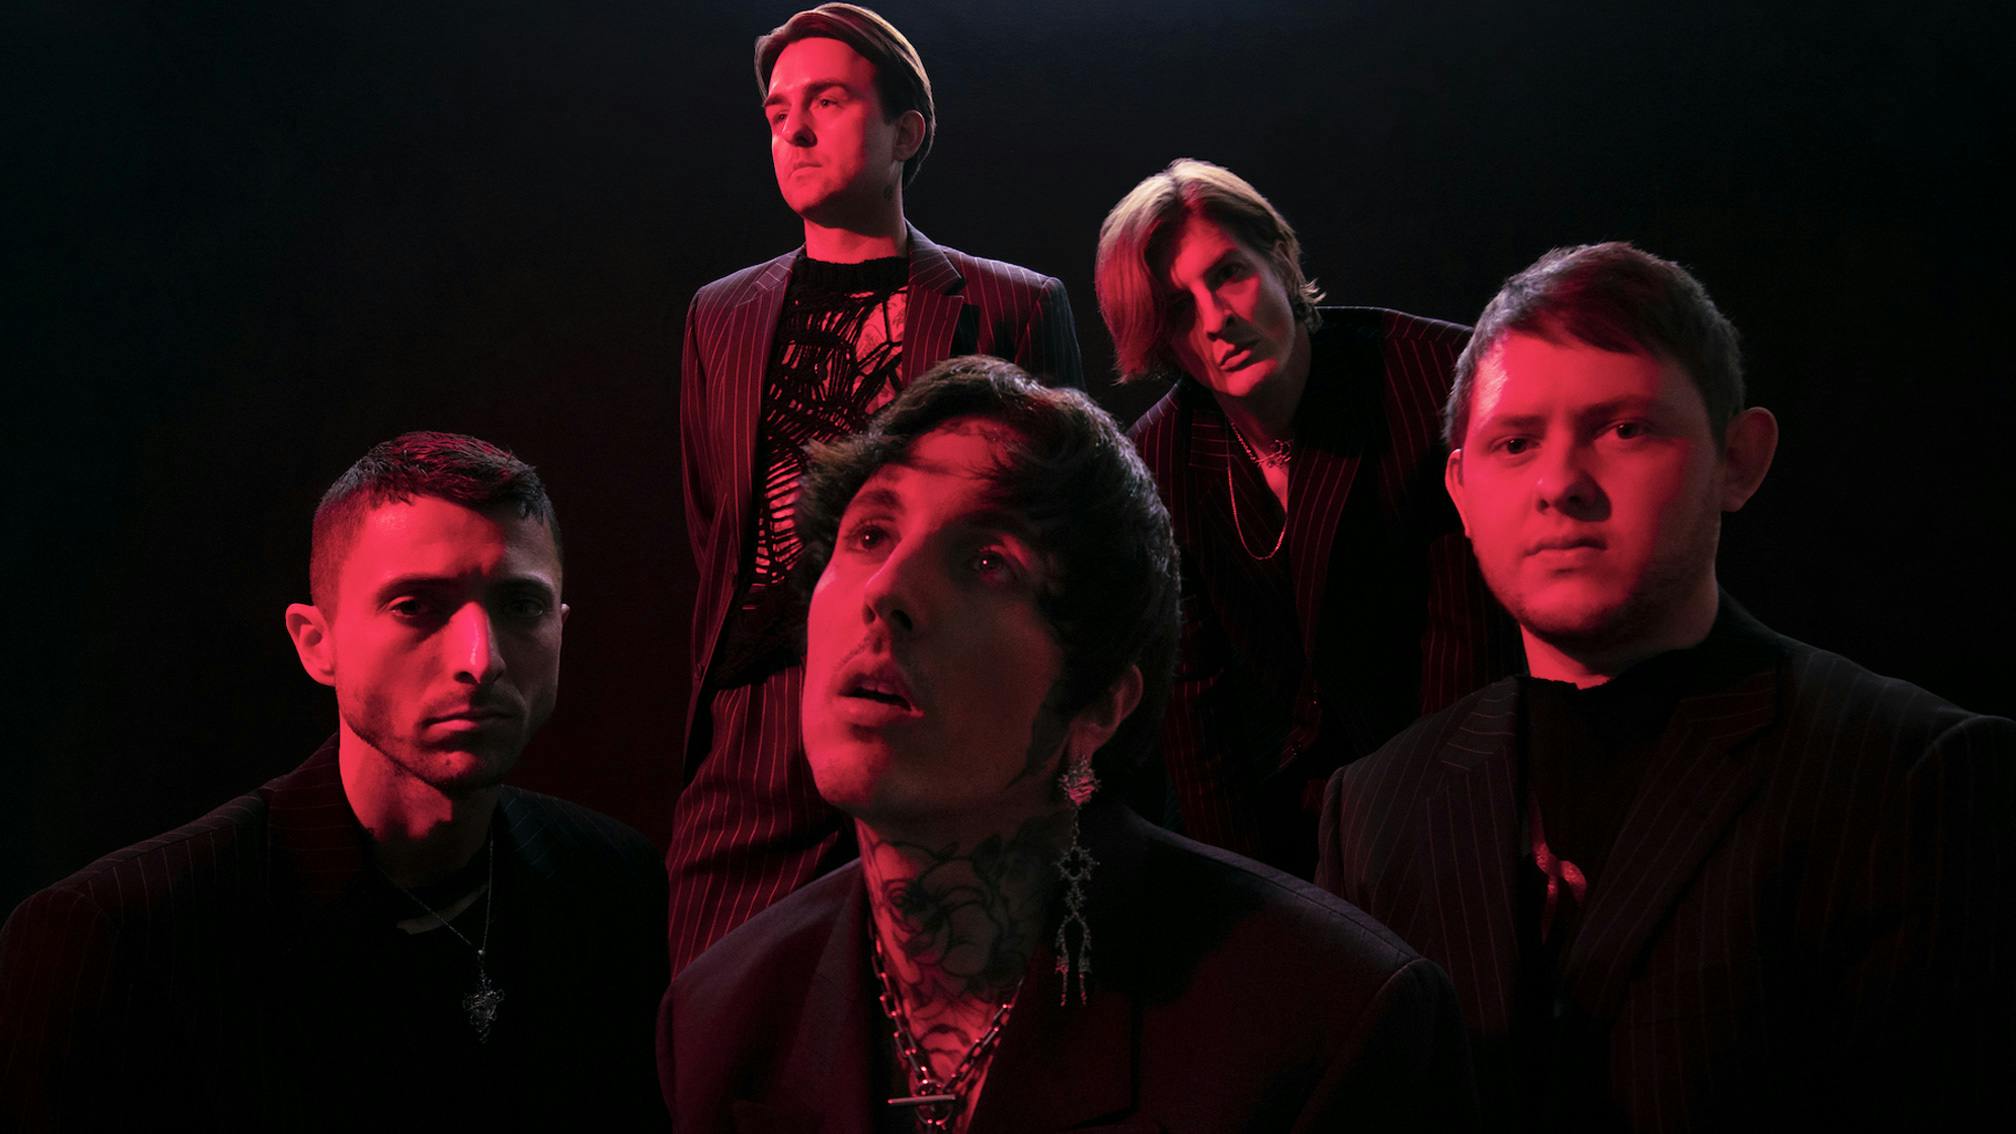 “This feels like the next logical step for us”: Bring Me The Horizon talk headlining Reading & Leeds 2022